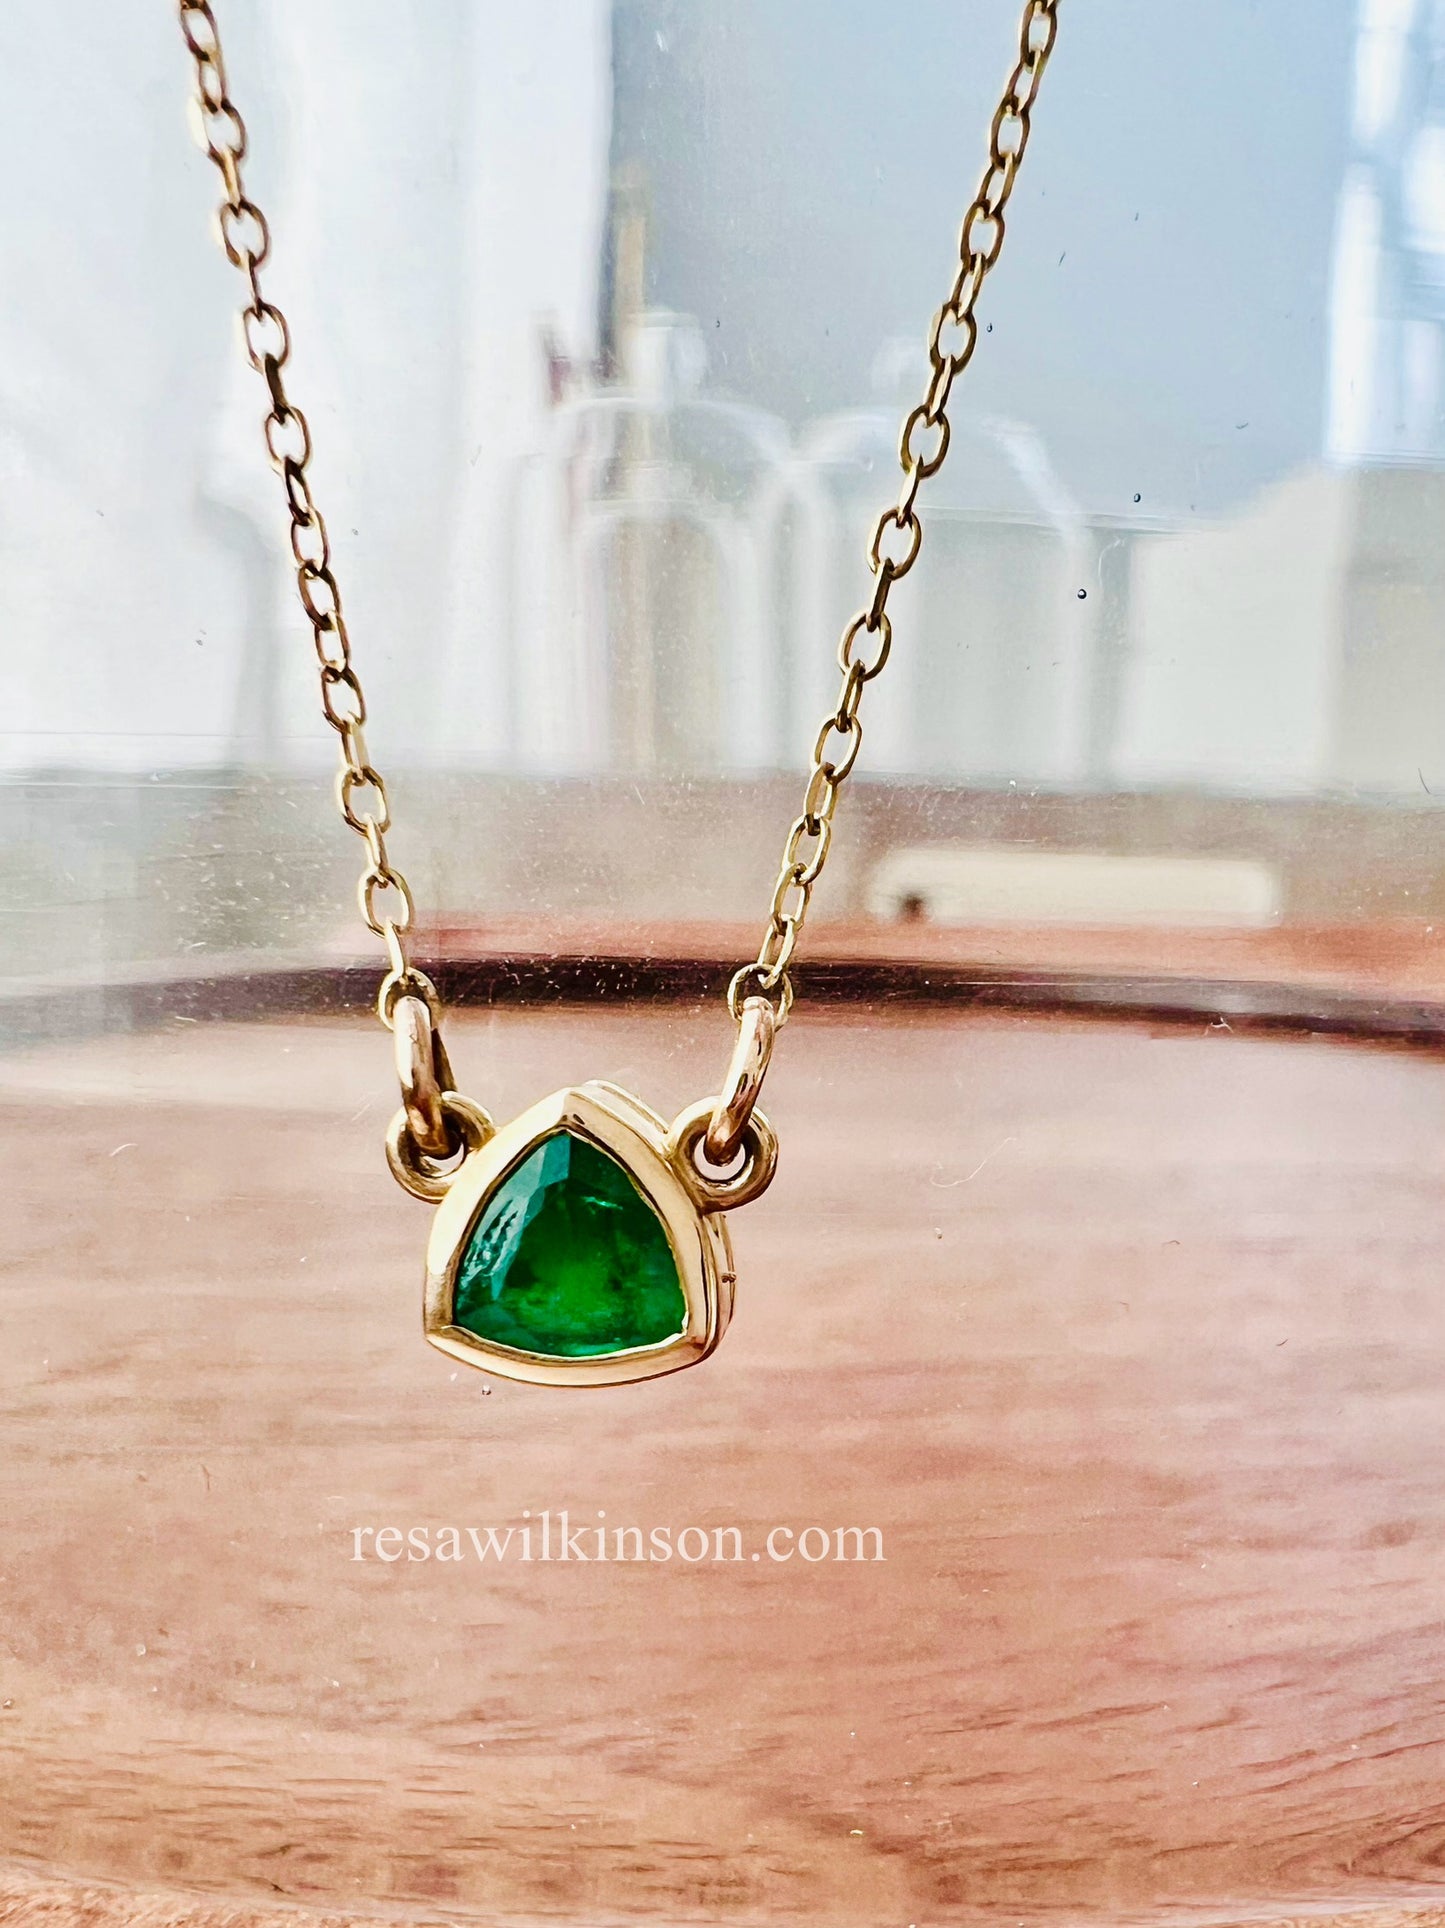 Emerald Solitaire Necklace 14k Yellow Gold Triangle Shape